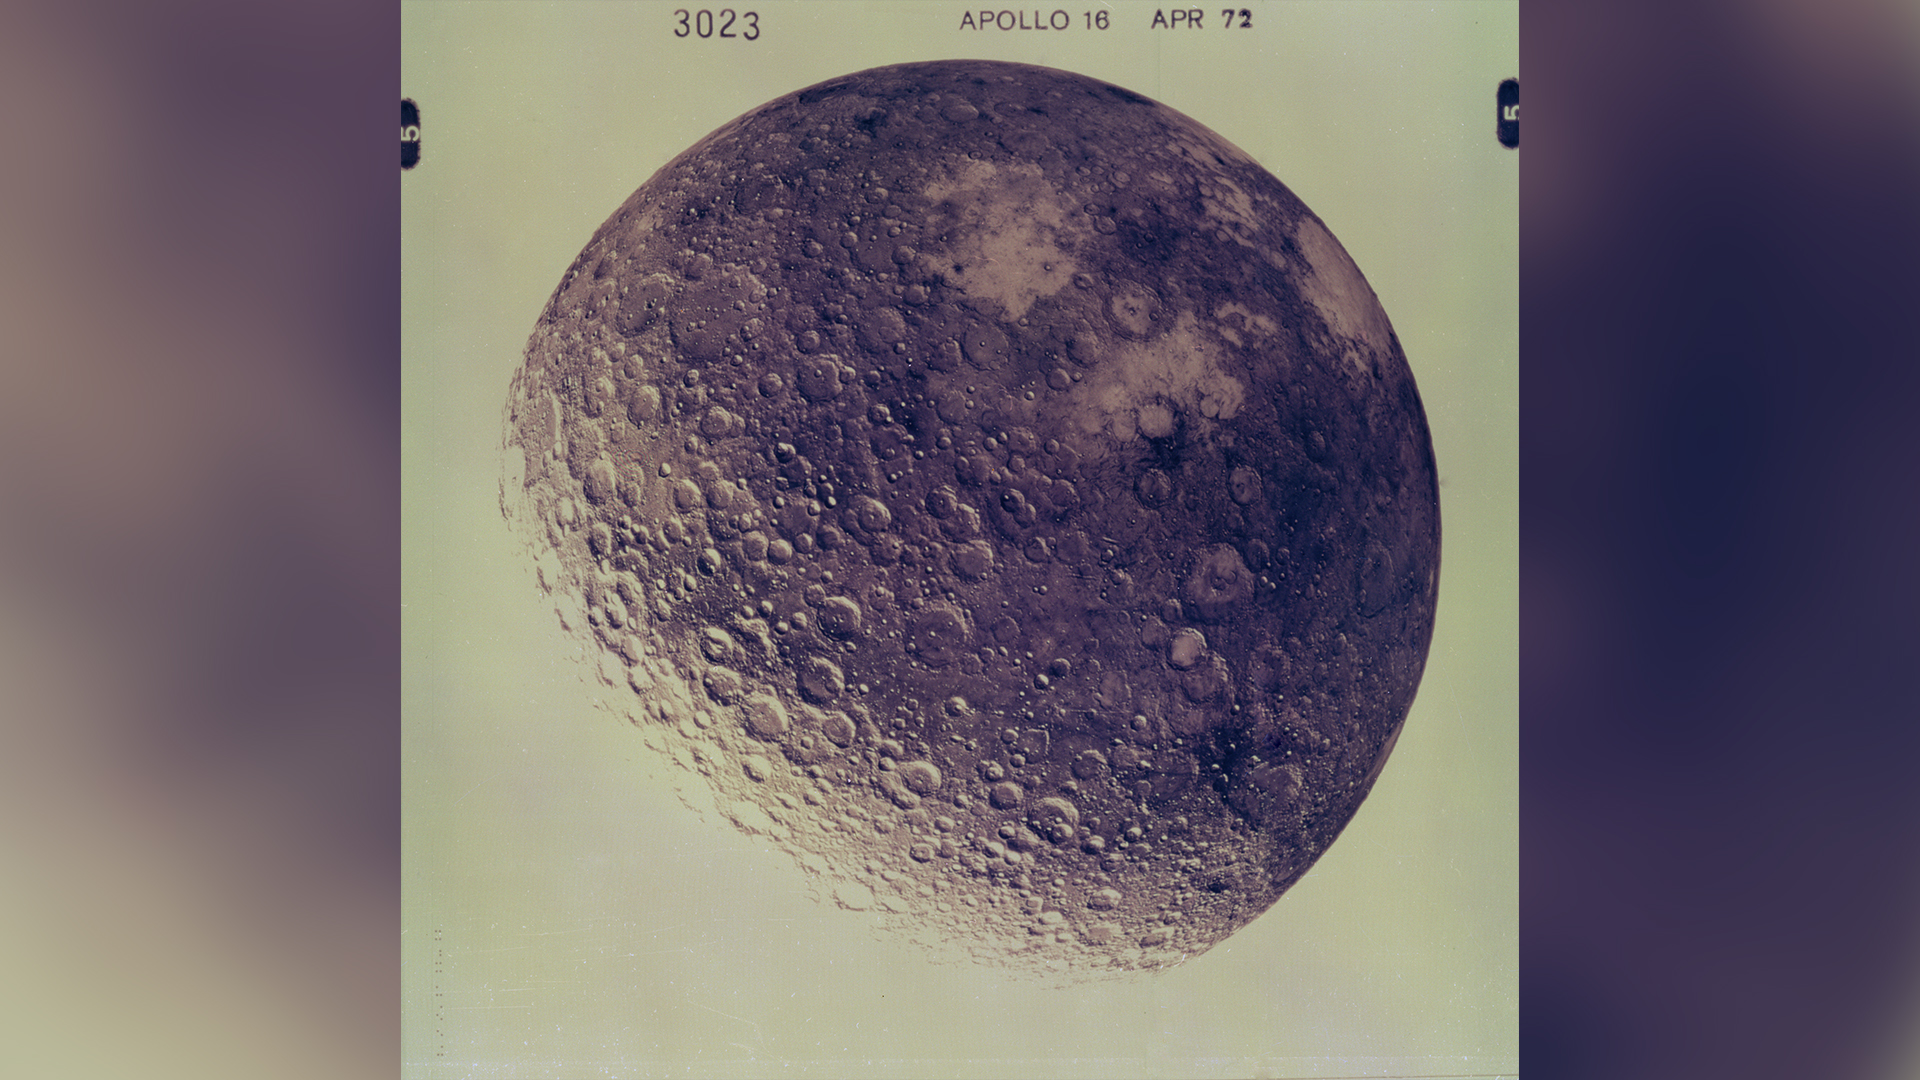 View of the back side of the moon taken by the Apollo 16 mission crew.